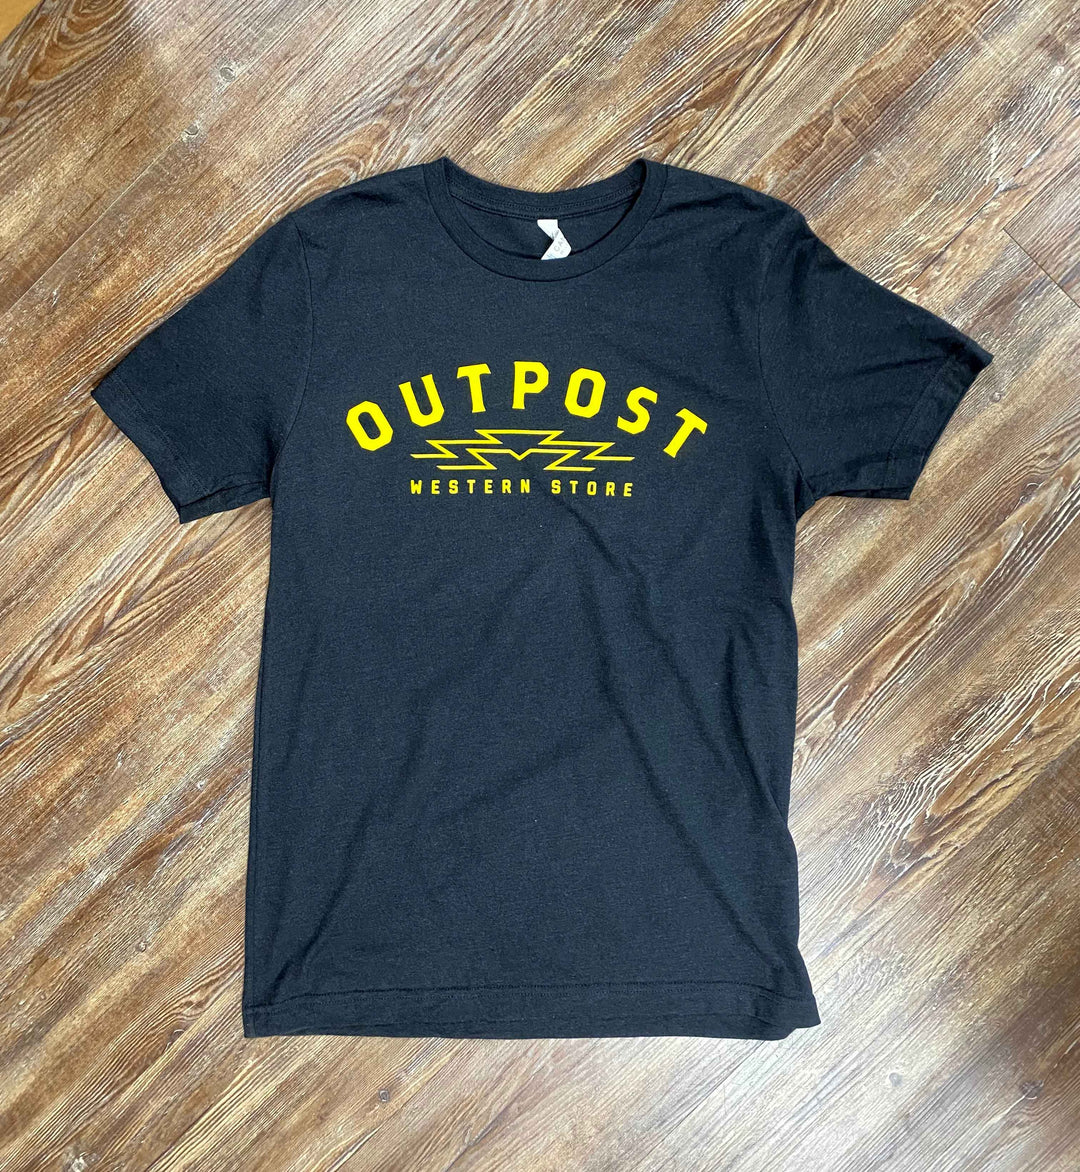 Outpost Sunrise Logo Tee black heather with yellow gold screen print